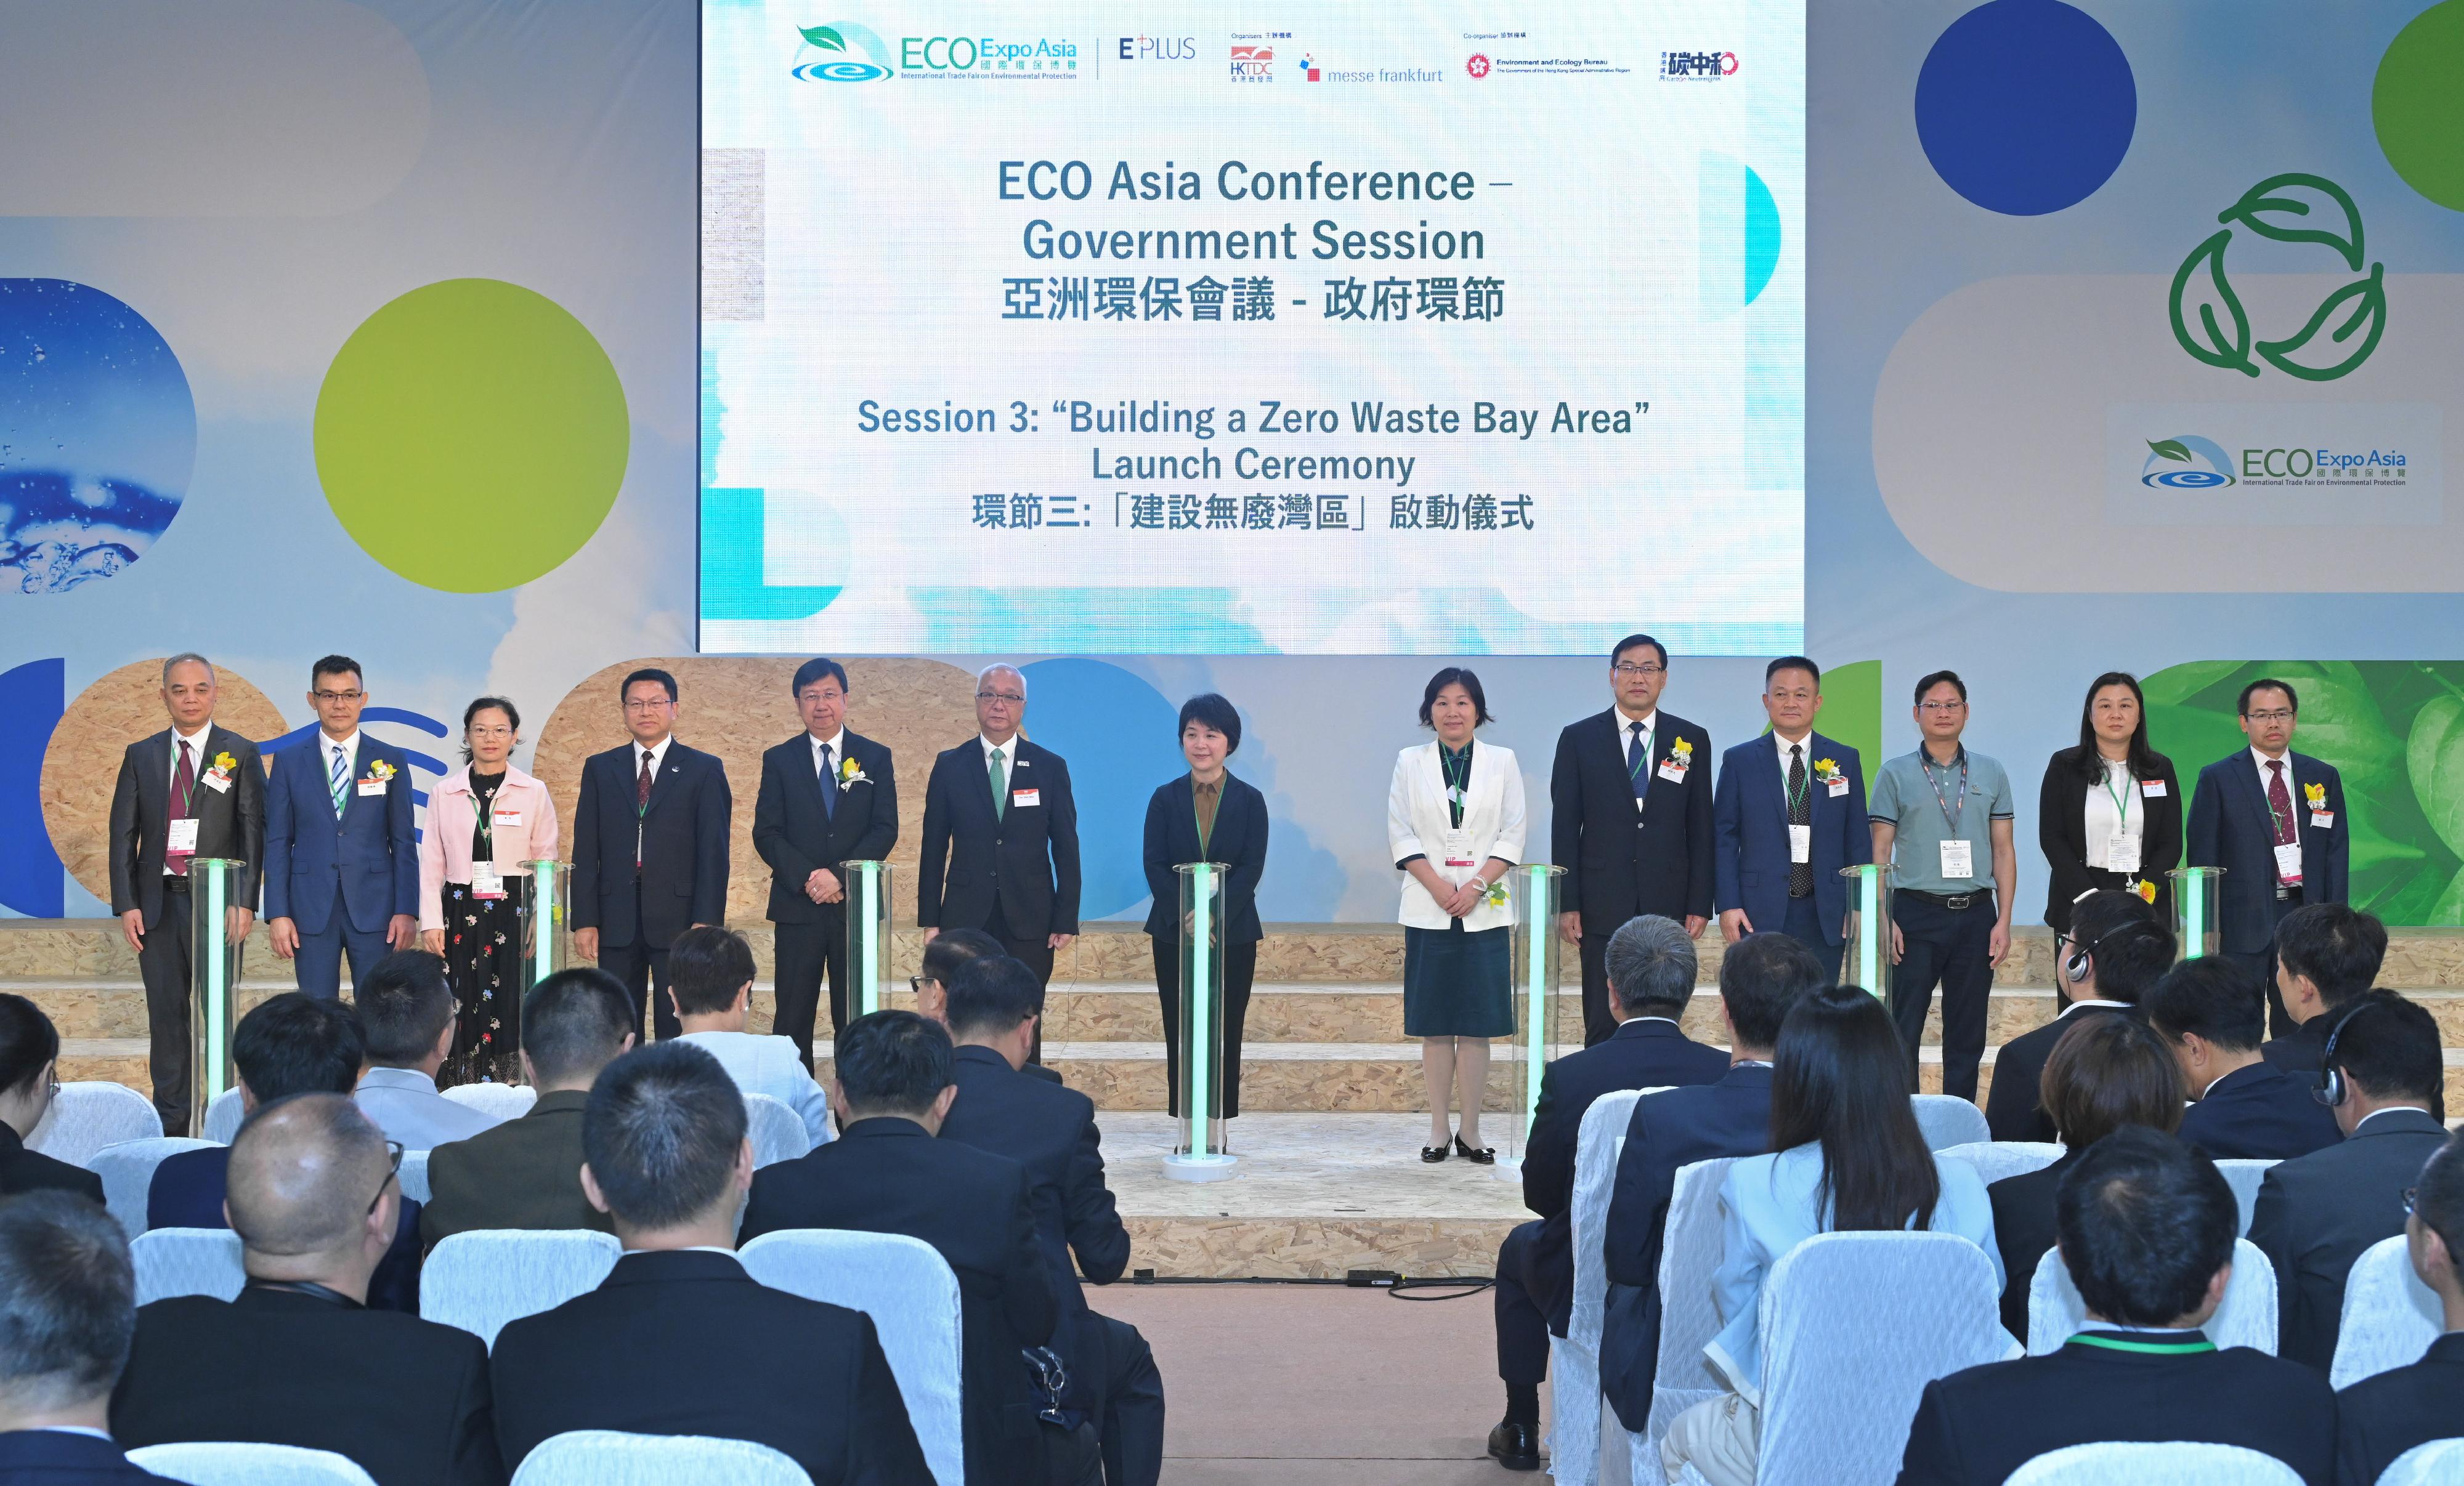 Vice Minister, member of the Leading Party Members Group of the Ministry of Ecology and Environment of the People's Republic of China, Ms Guo Fang (centre), and the Secretary for Environment and Ecology, Mr Tse Chin-wan (sixth left), officiate with other guests at the "Building a Zero Waste Bay Area" launch ceremony at the Eco Asia Conference today (October 26).